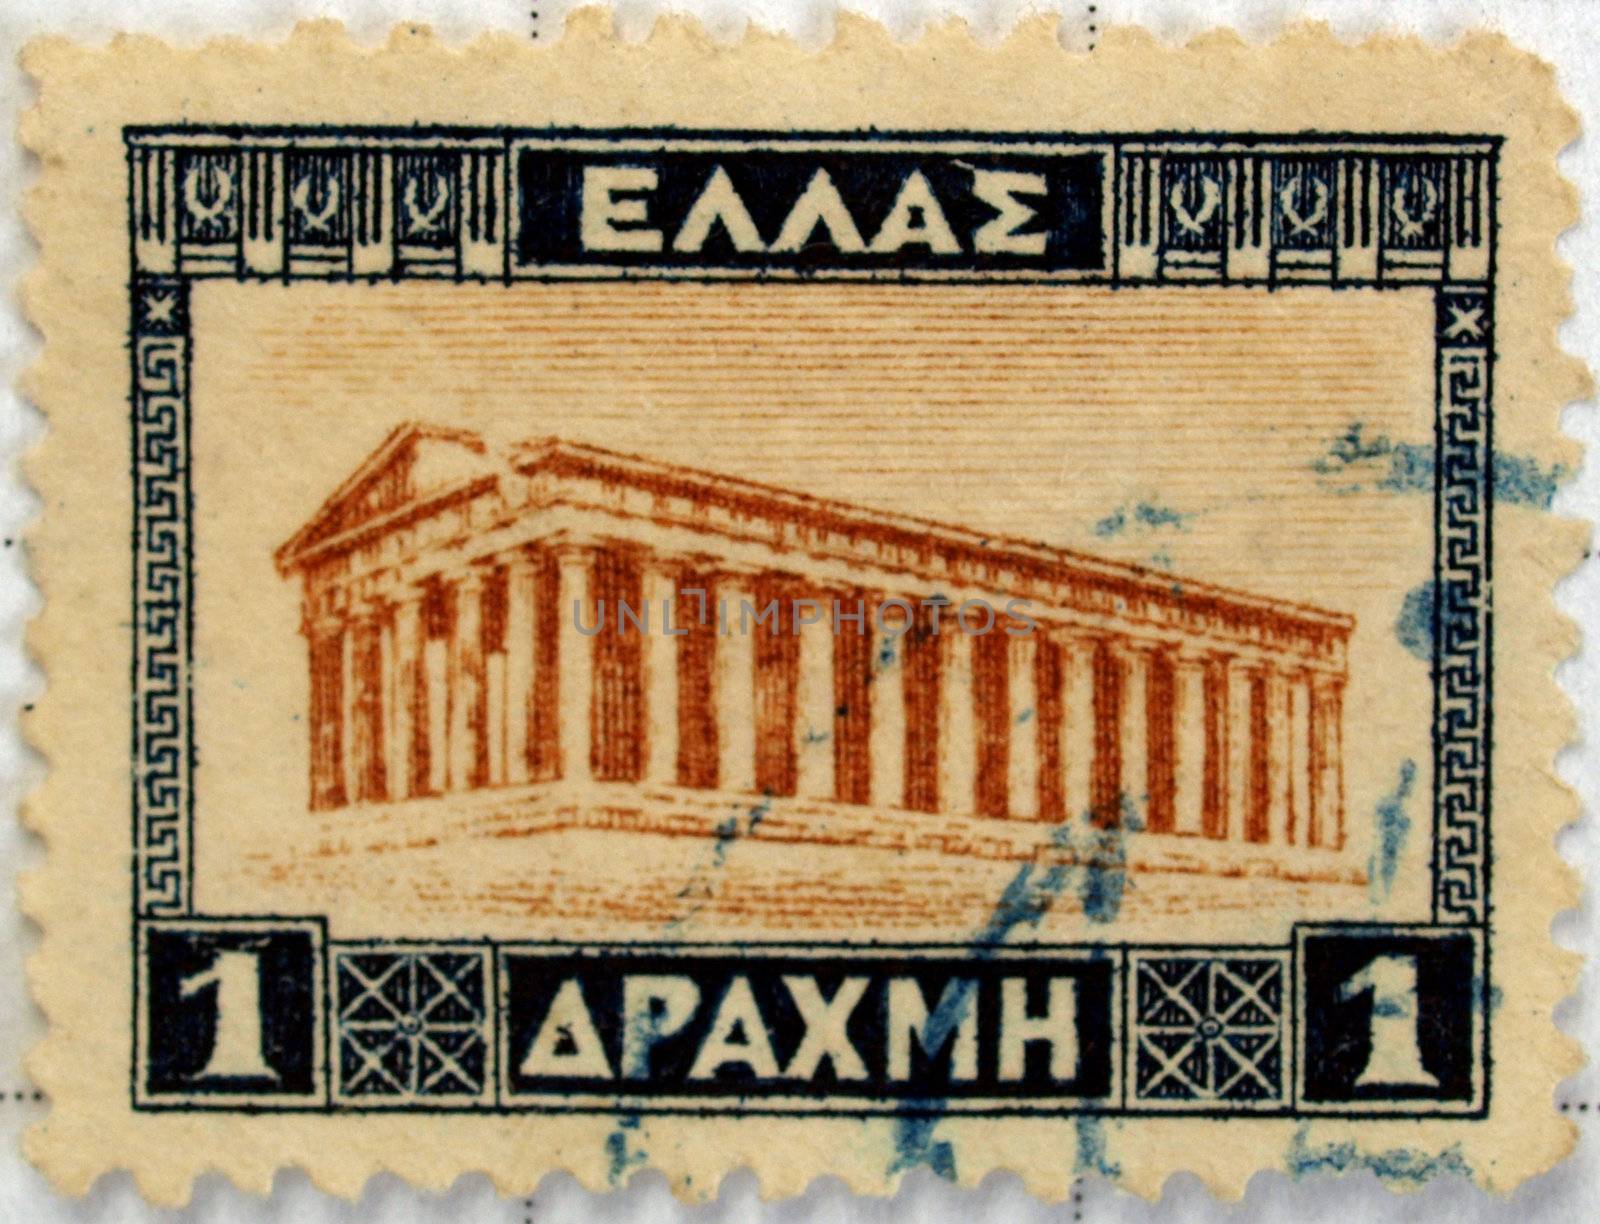 Greece stamps by claudiodivizia